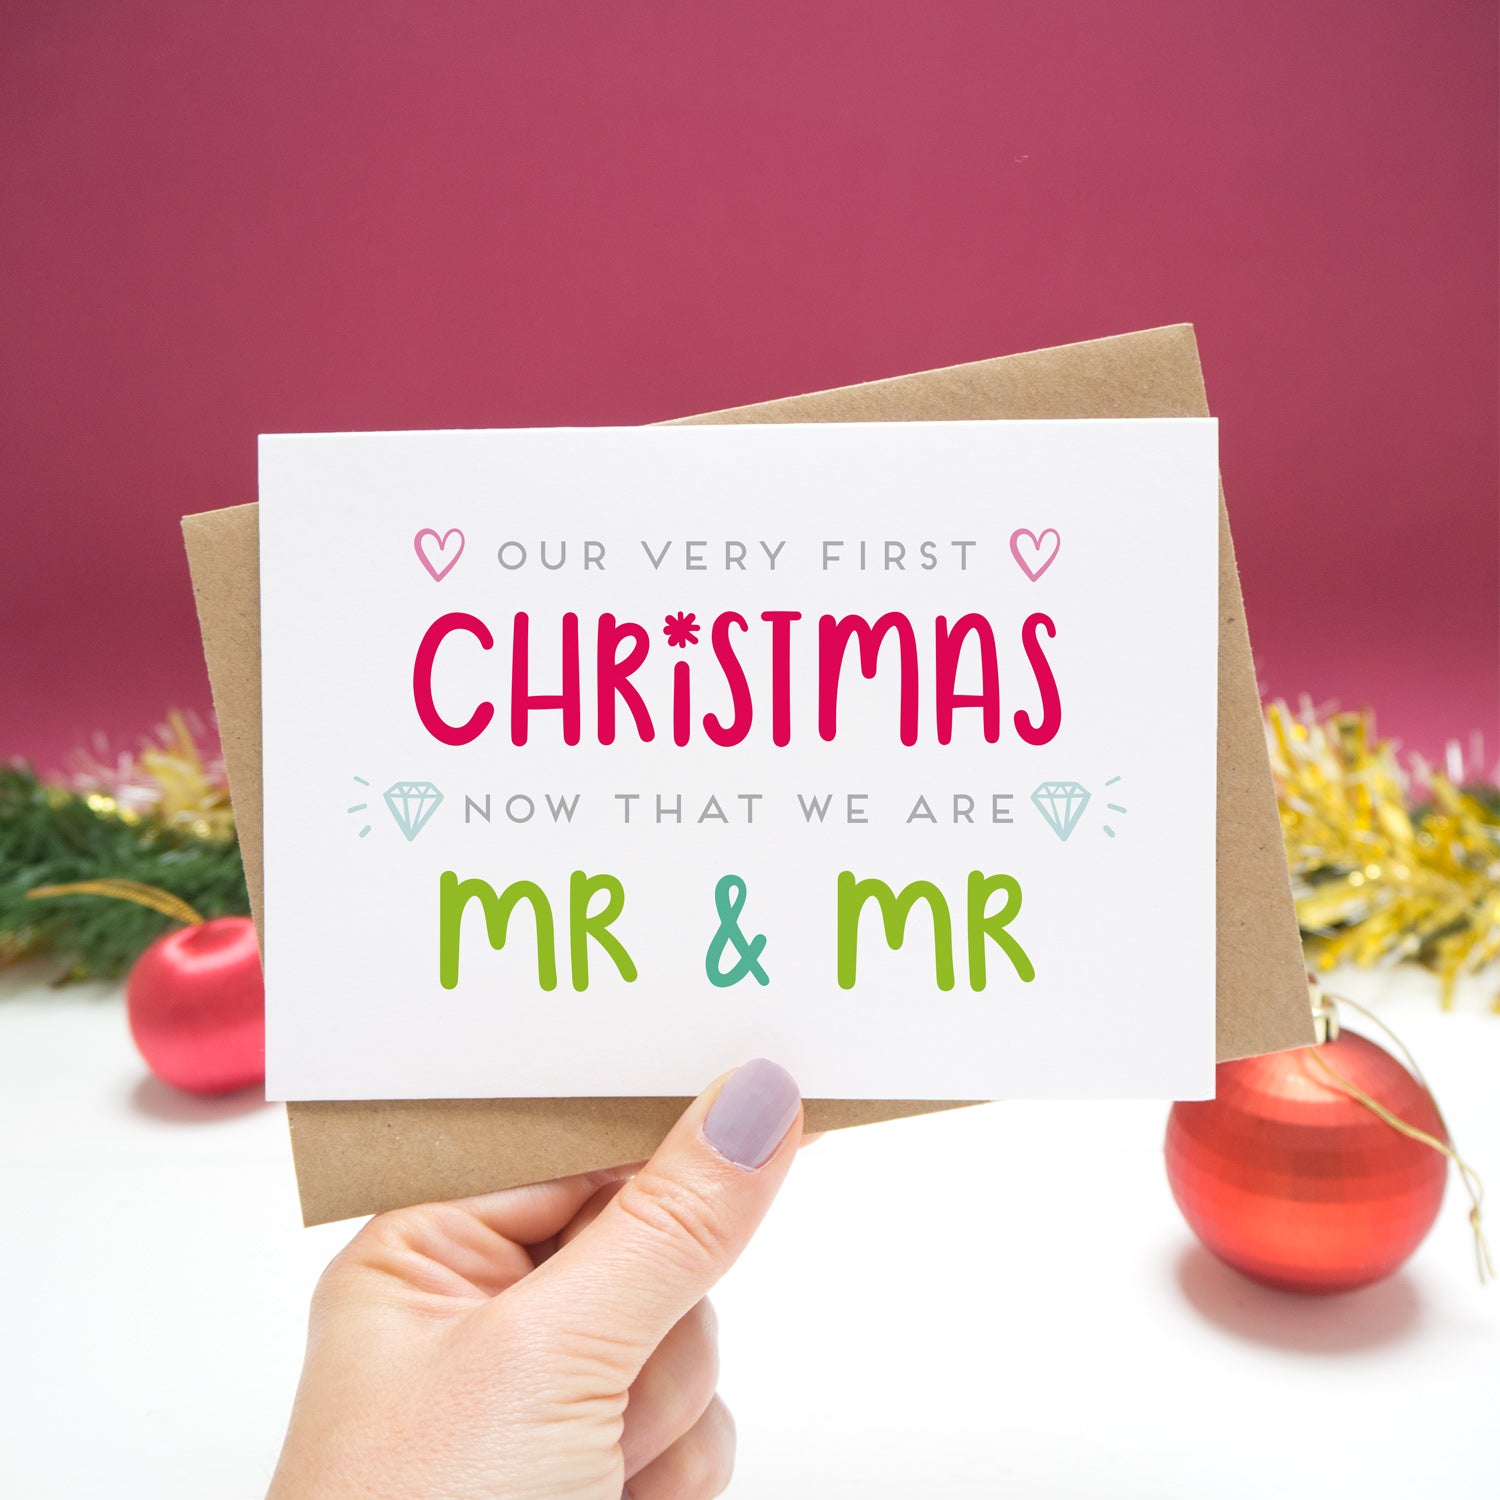 'Our very first Christmas now that we are Mr and Mr.' Christmas Card held in front of a Christmassy scene with baubles and tinsel.